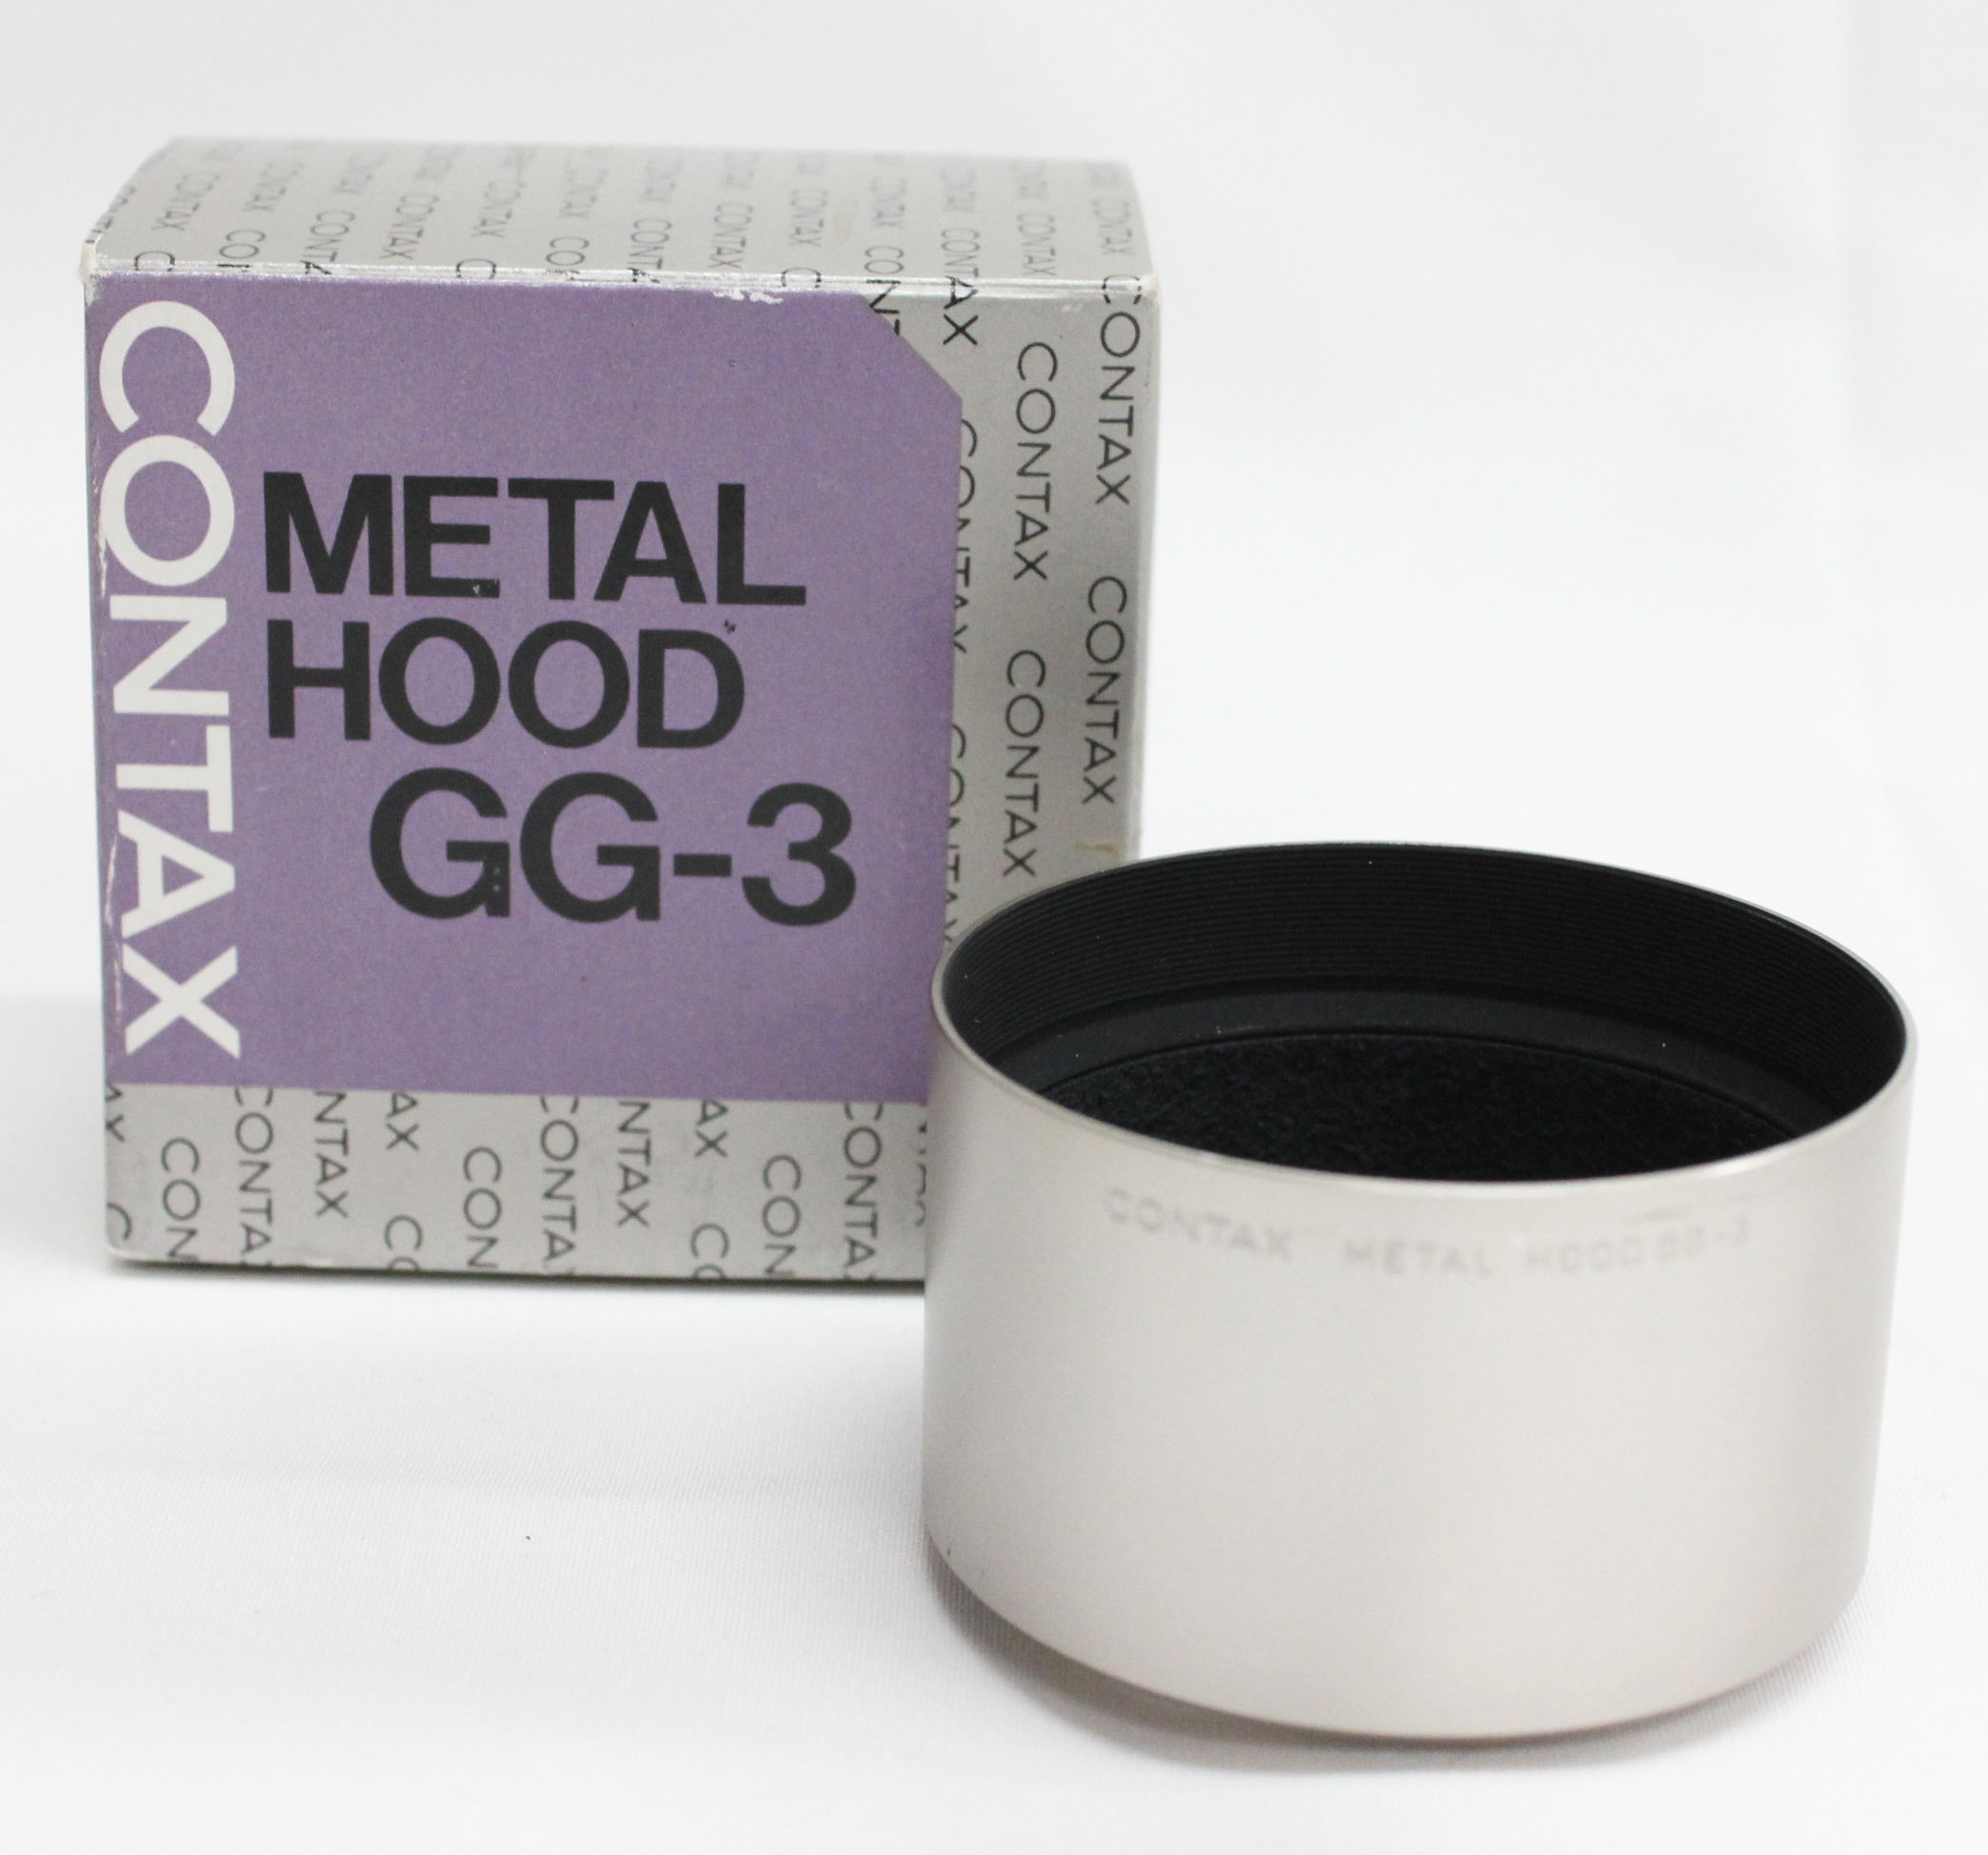  Contax Metal Hood GG-3 for G1, G2 Sonnar 90mm F2.8 Lens from Japan Photo 0